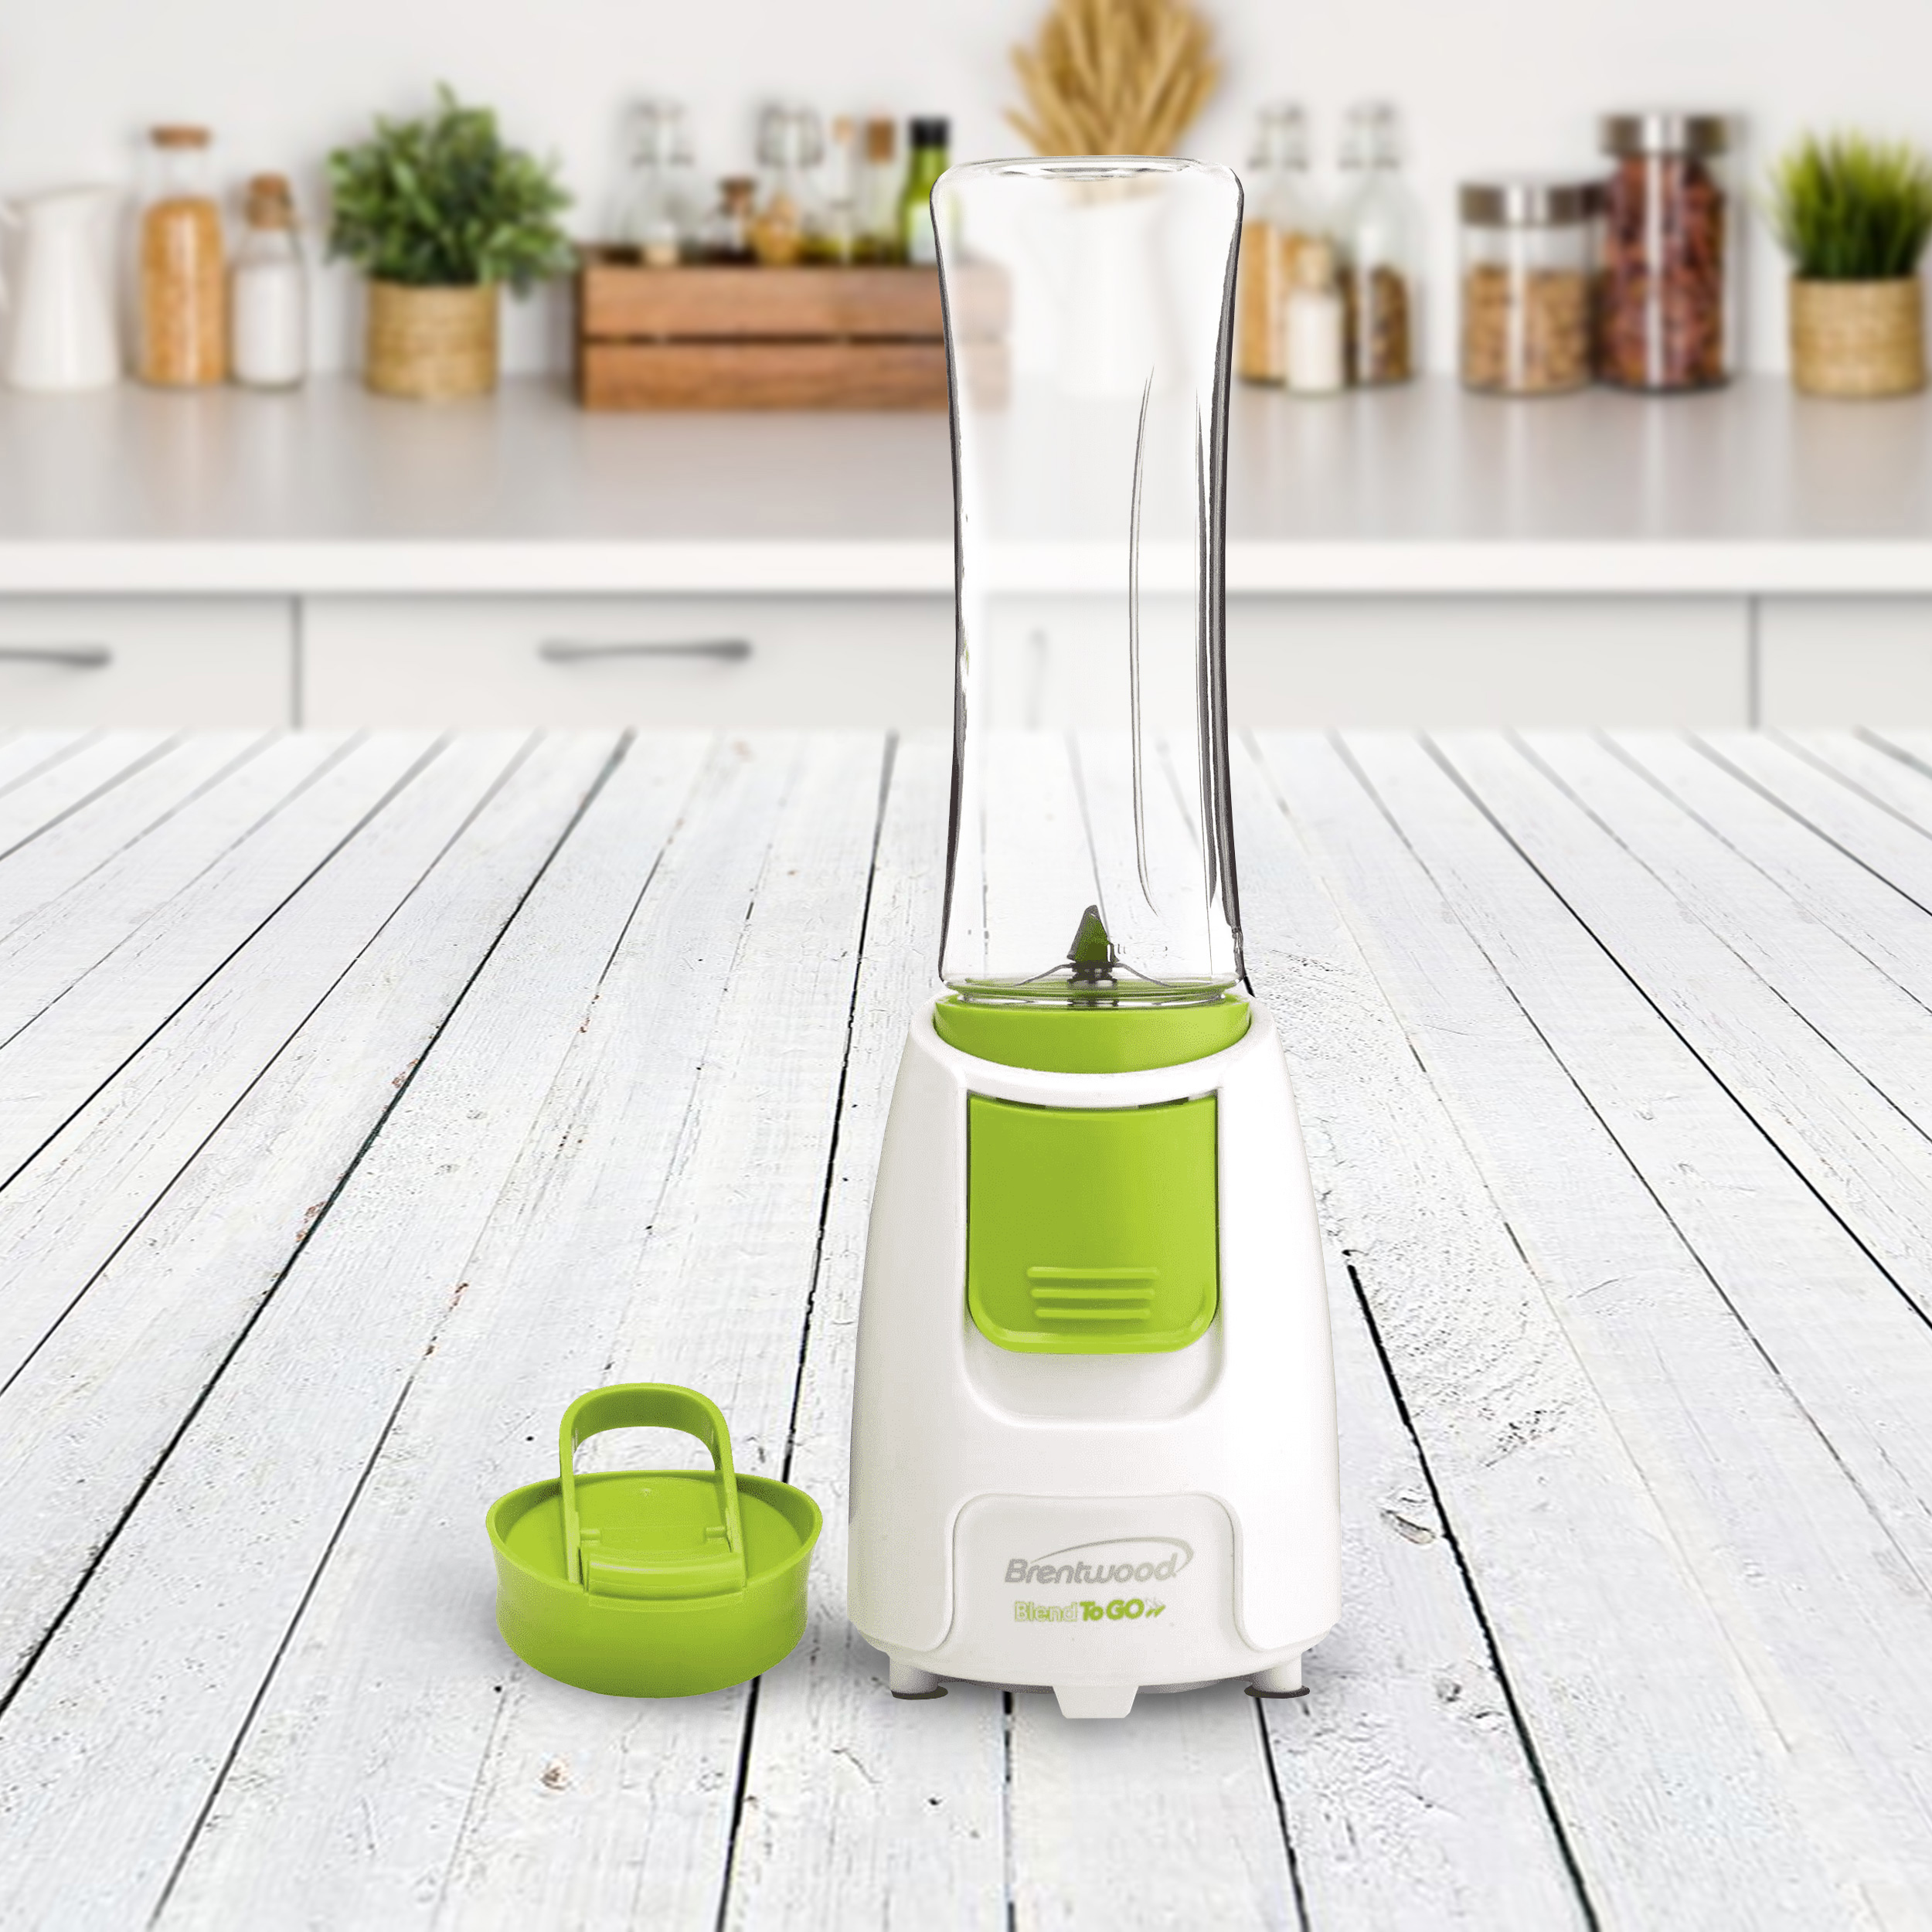 Brentwood Blend-to-go Personal Blender In Green And White : Target